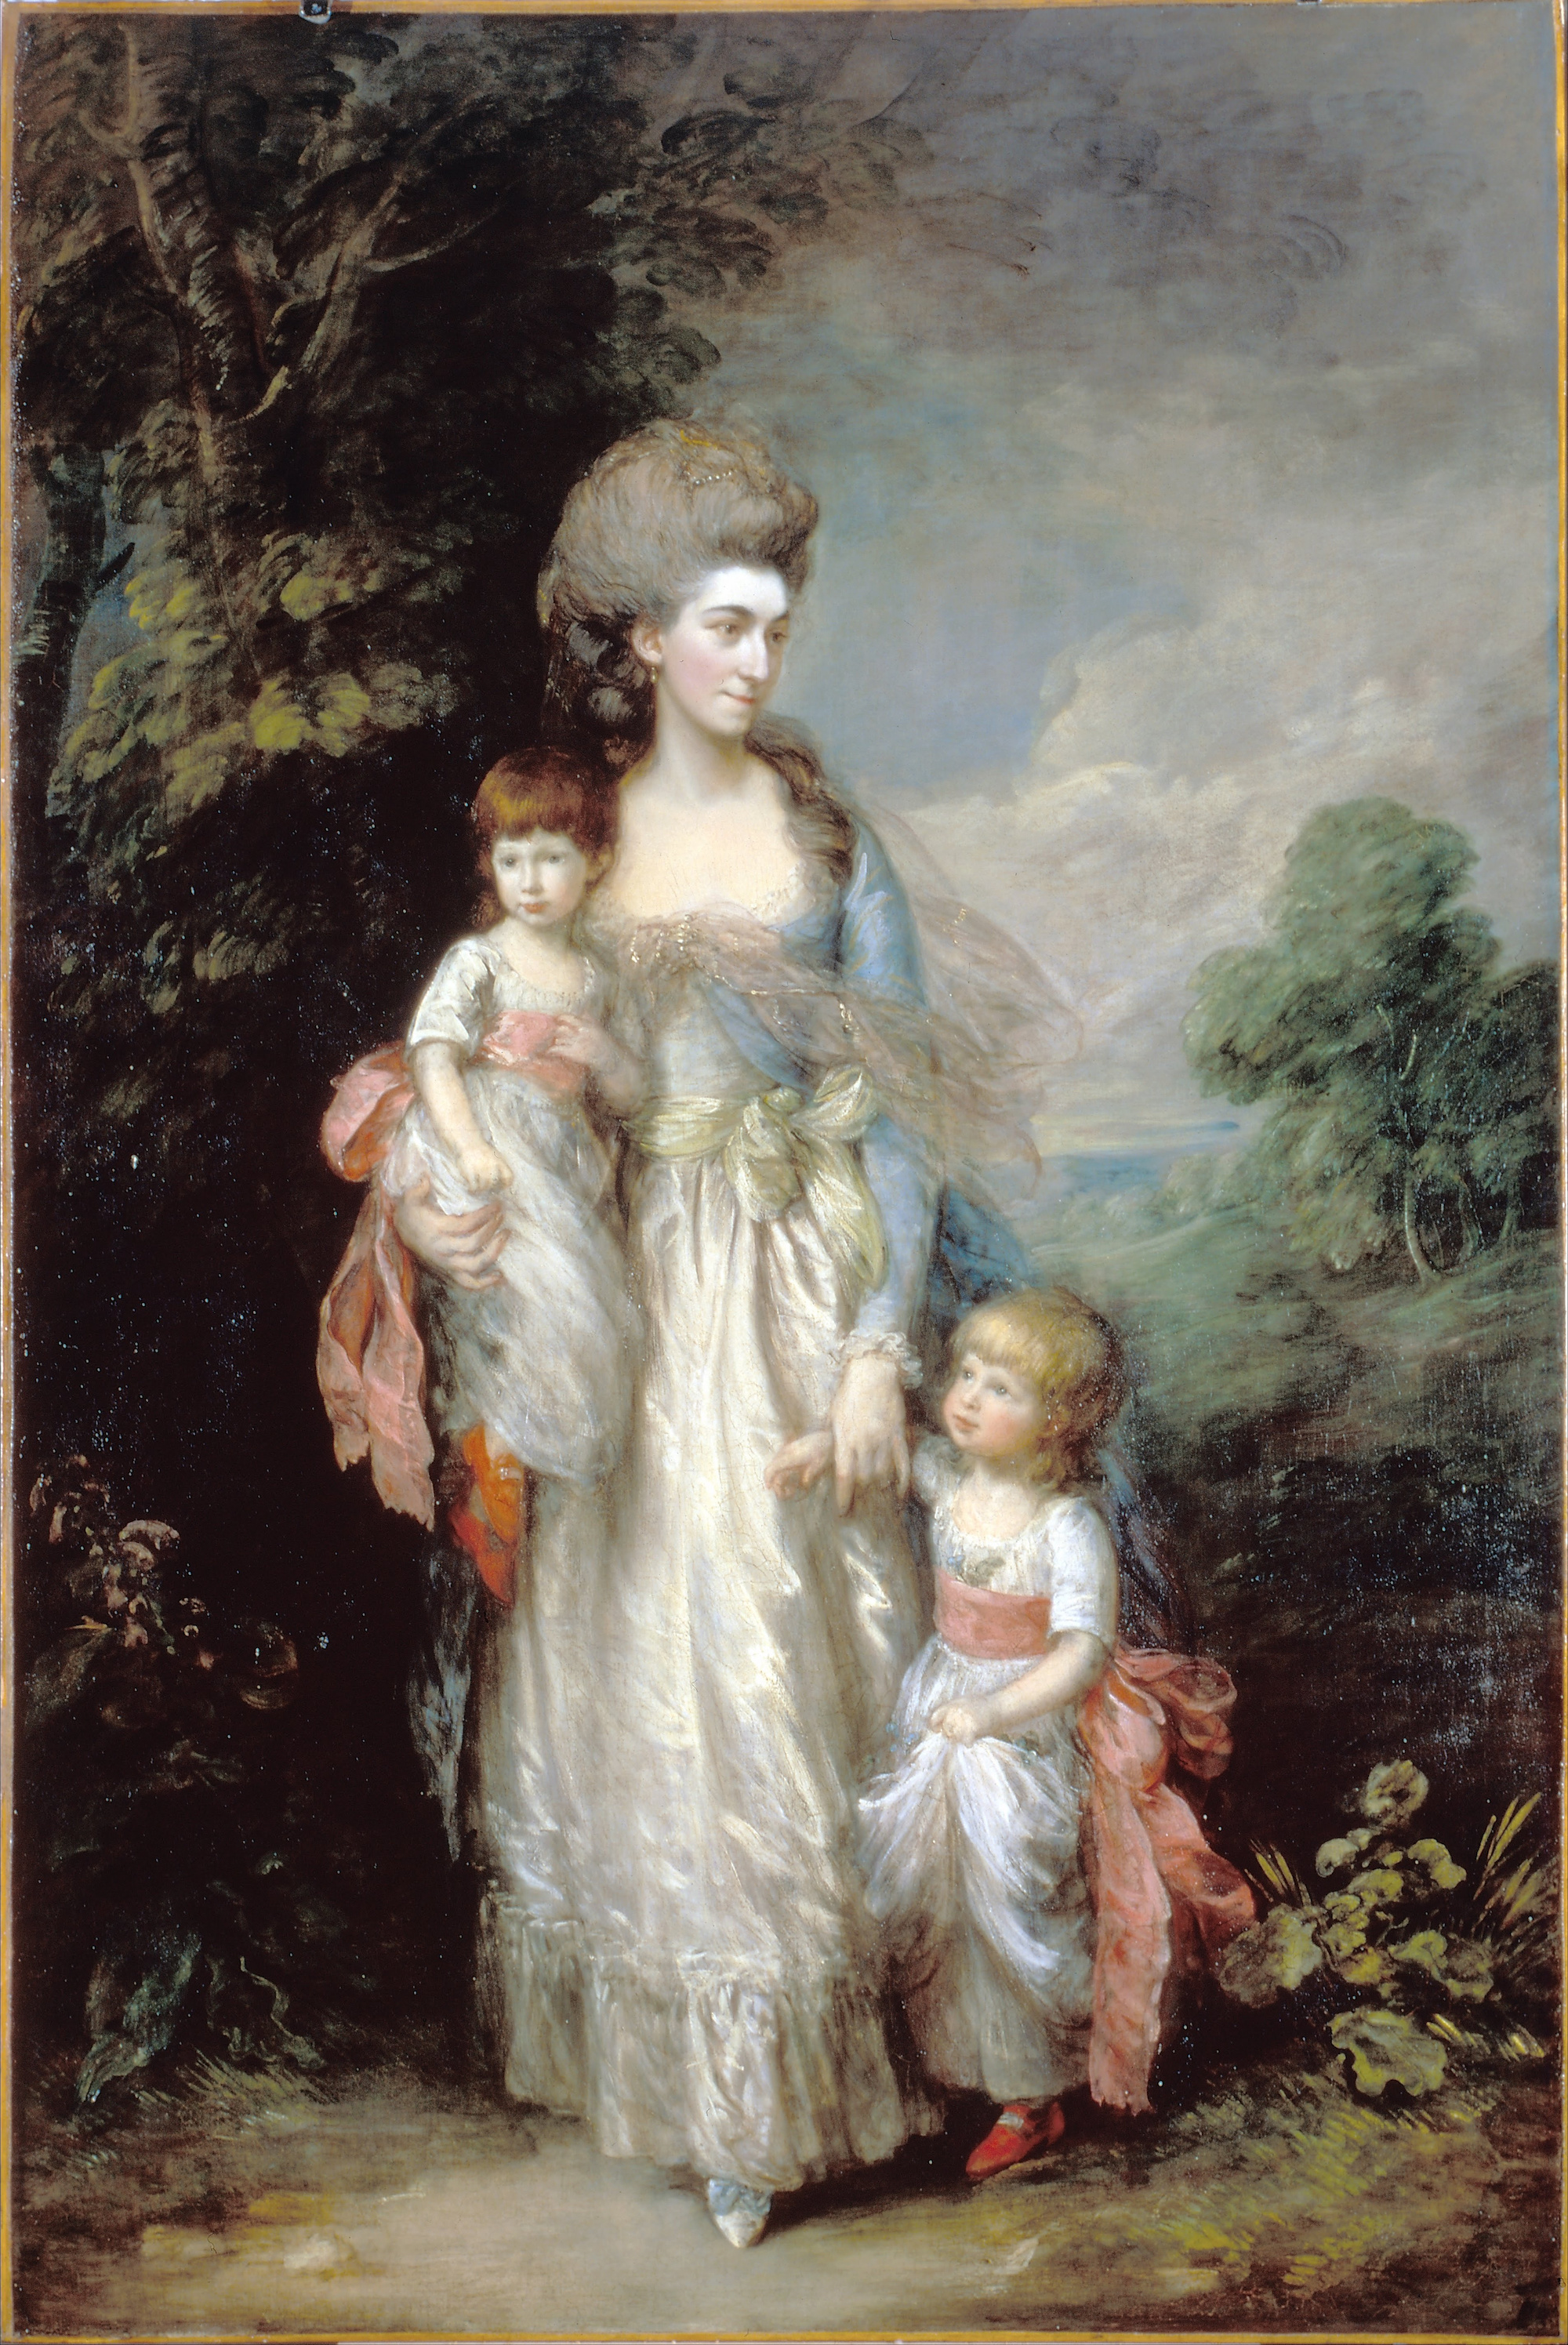 Mrs Elizabeth Moody with her sons Samuel and Thomas by Thomas Gainsborough - c.1779-85 - 154.2 x 234 cm Dulwich Picture Gallery